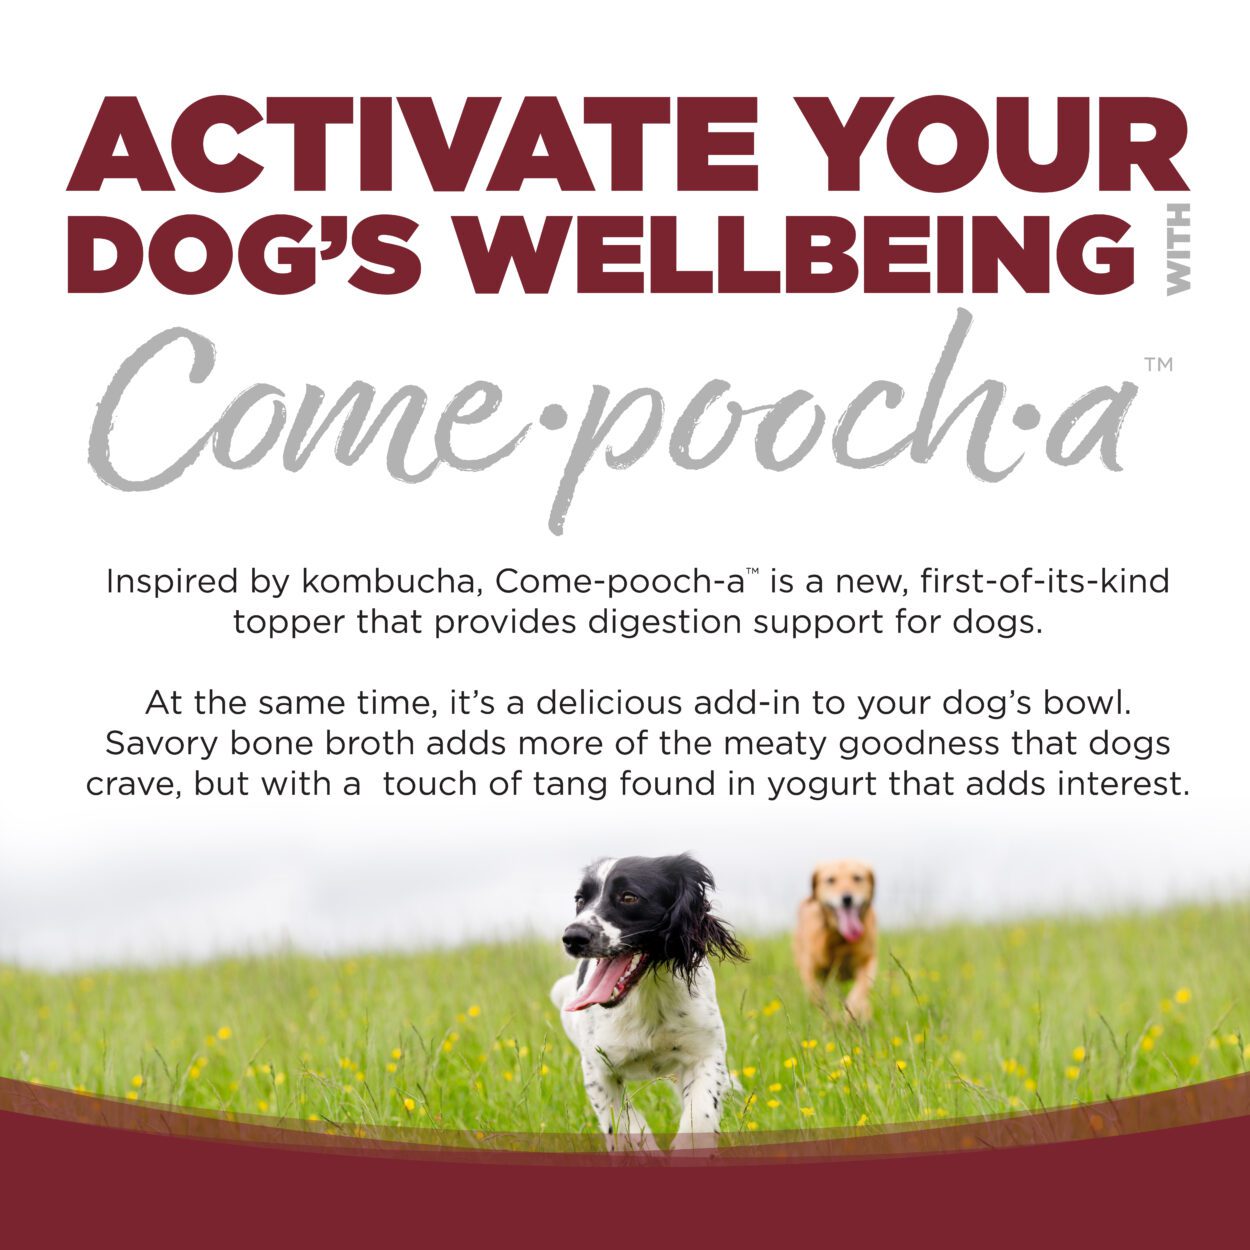 ACTIVATE YOUR DOG'S WELLBEING WITH COME-POOCH-A